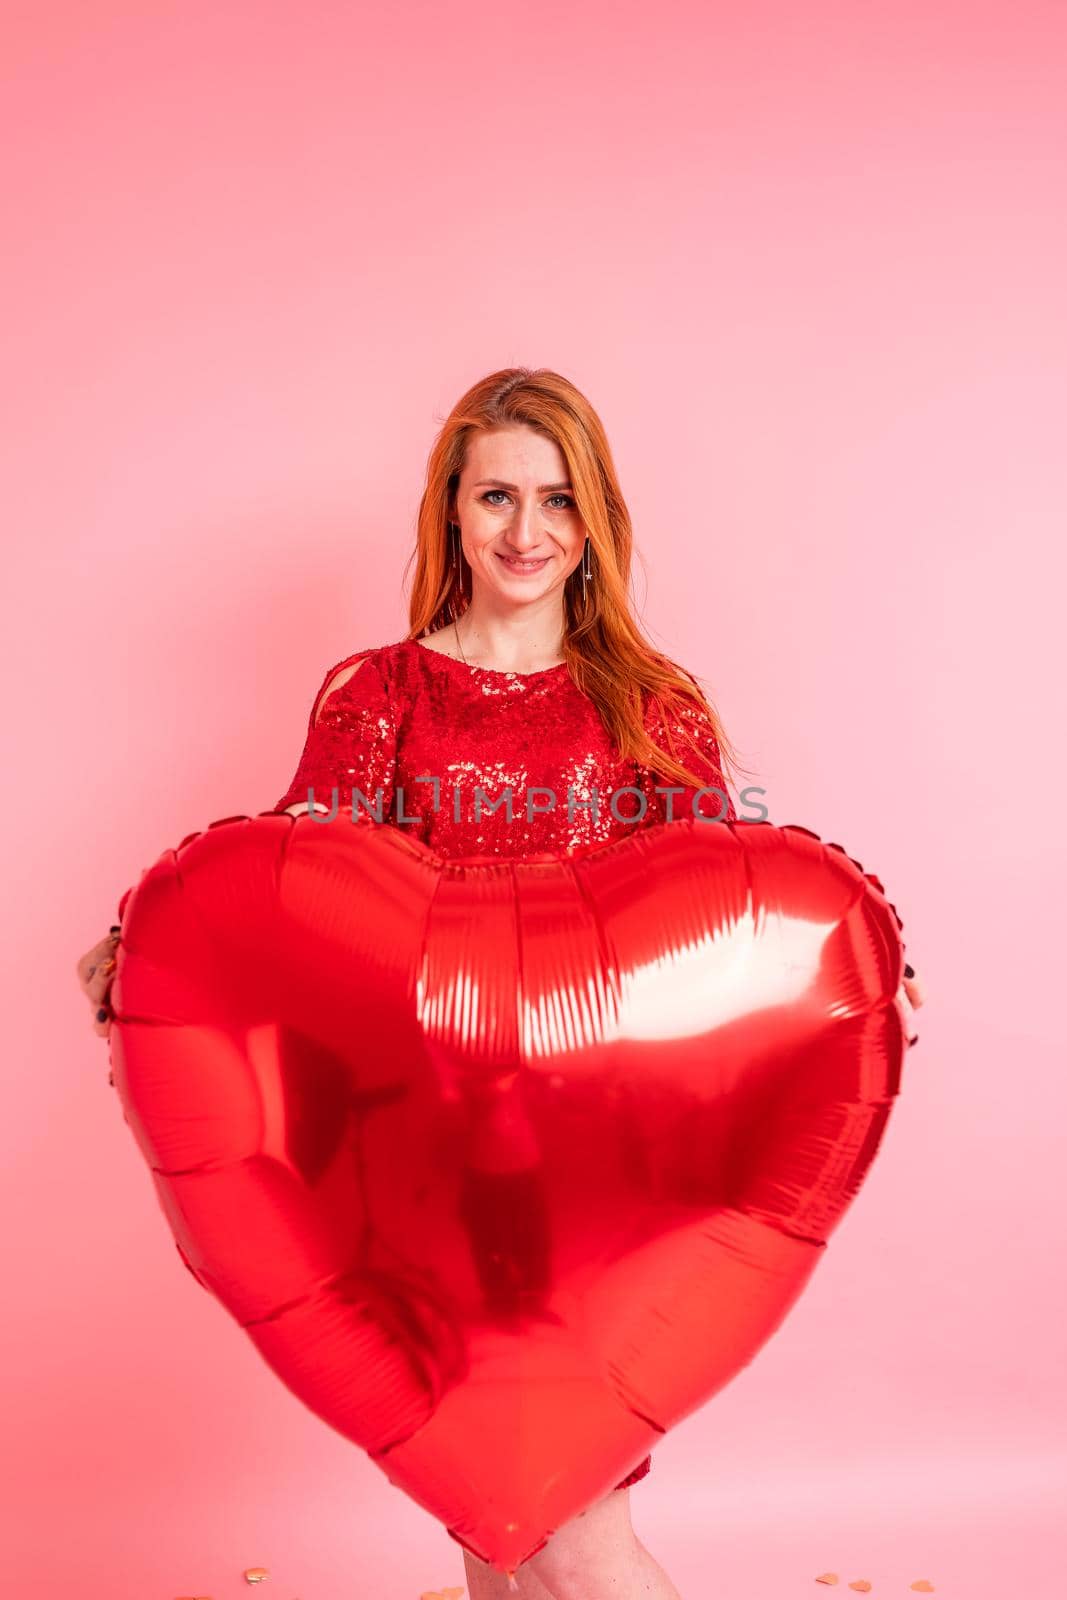 Beautiful redhead girl with red heart baloon posing. Happy Valentine's Day concept by Len44ik